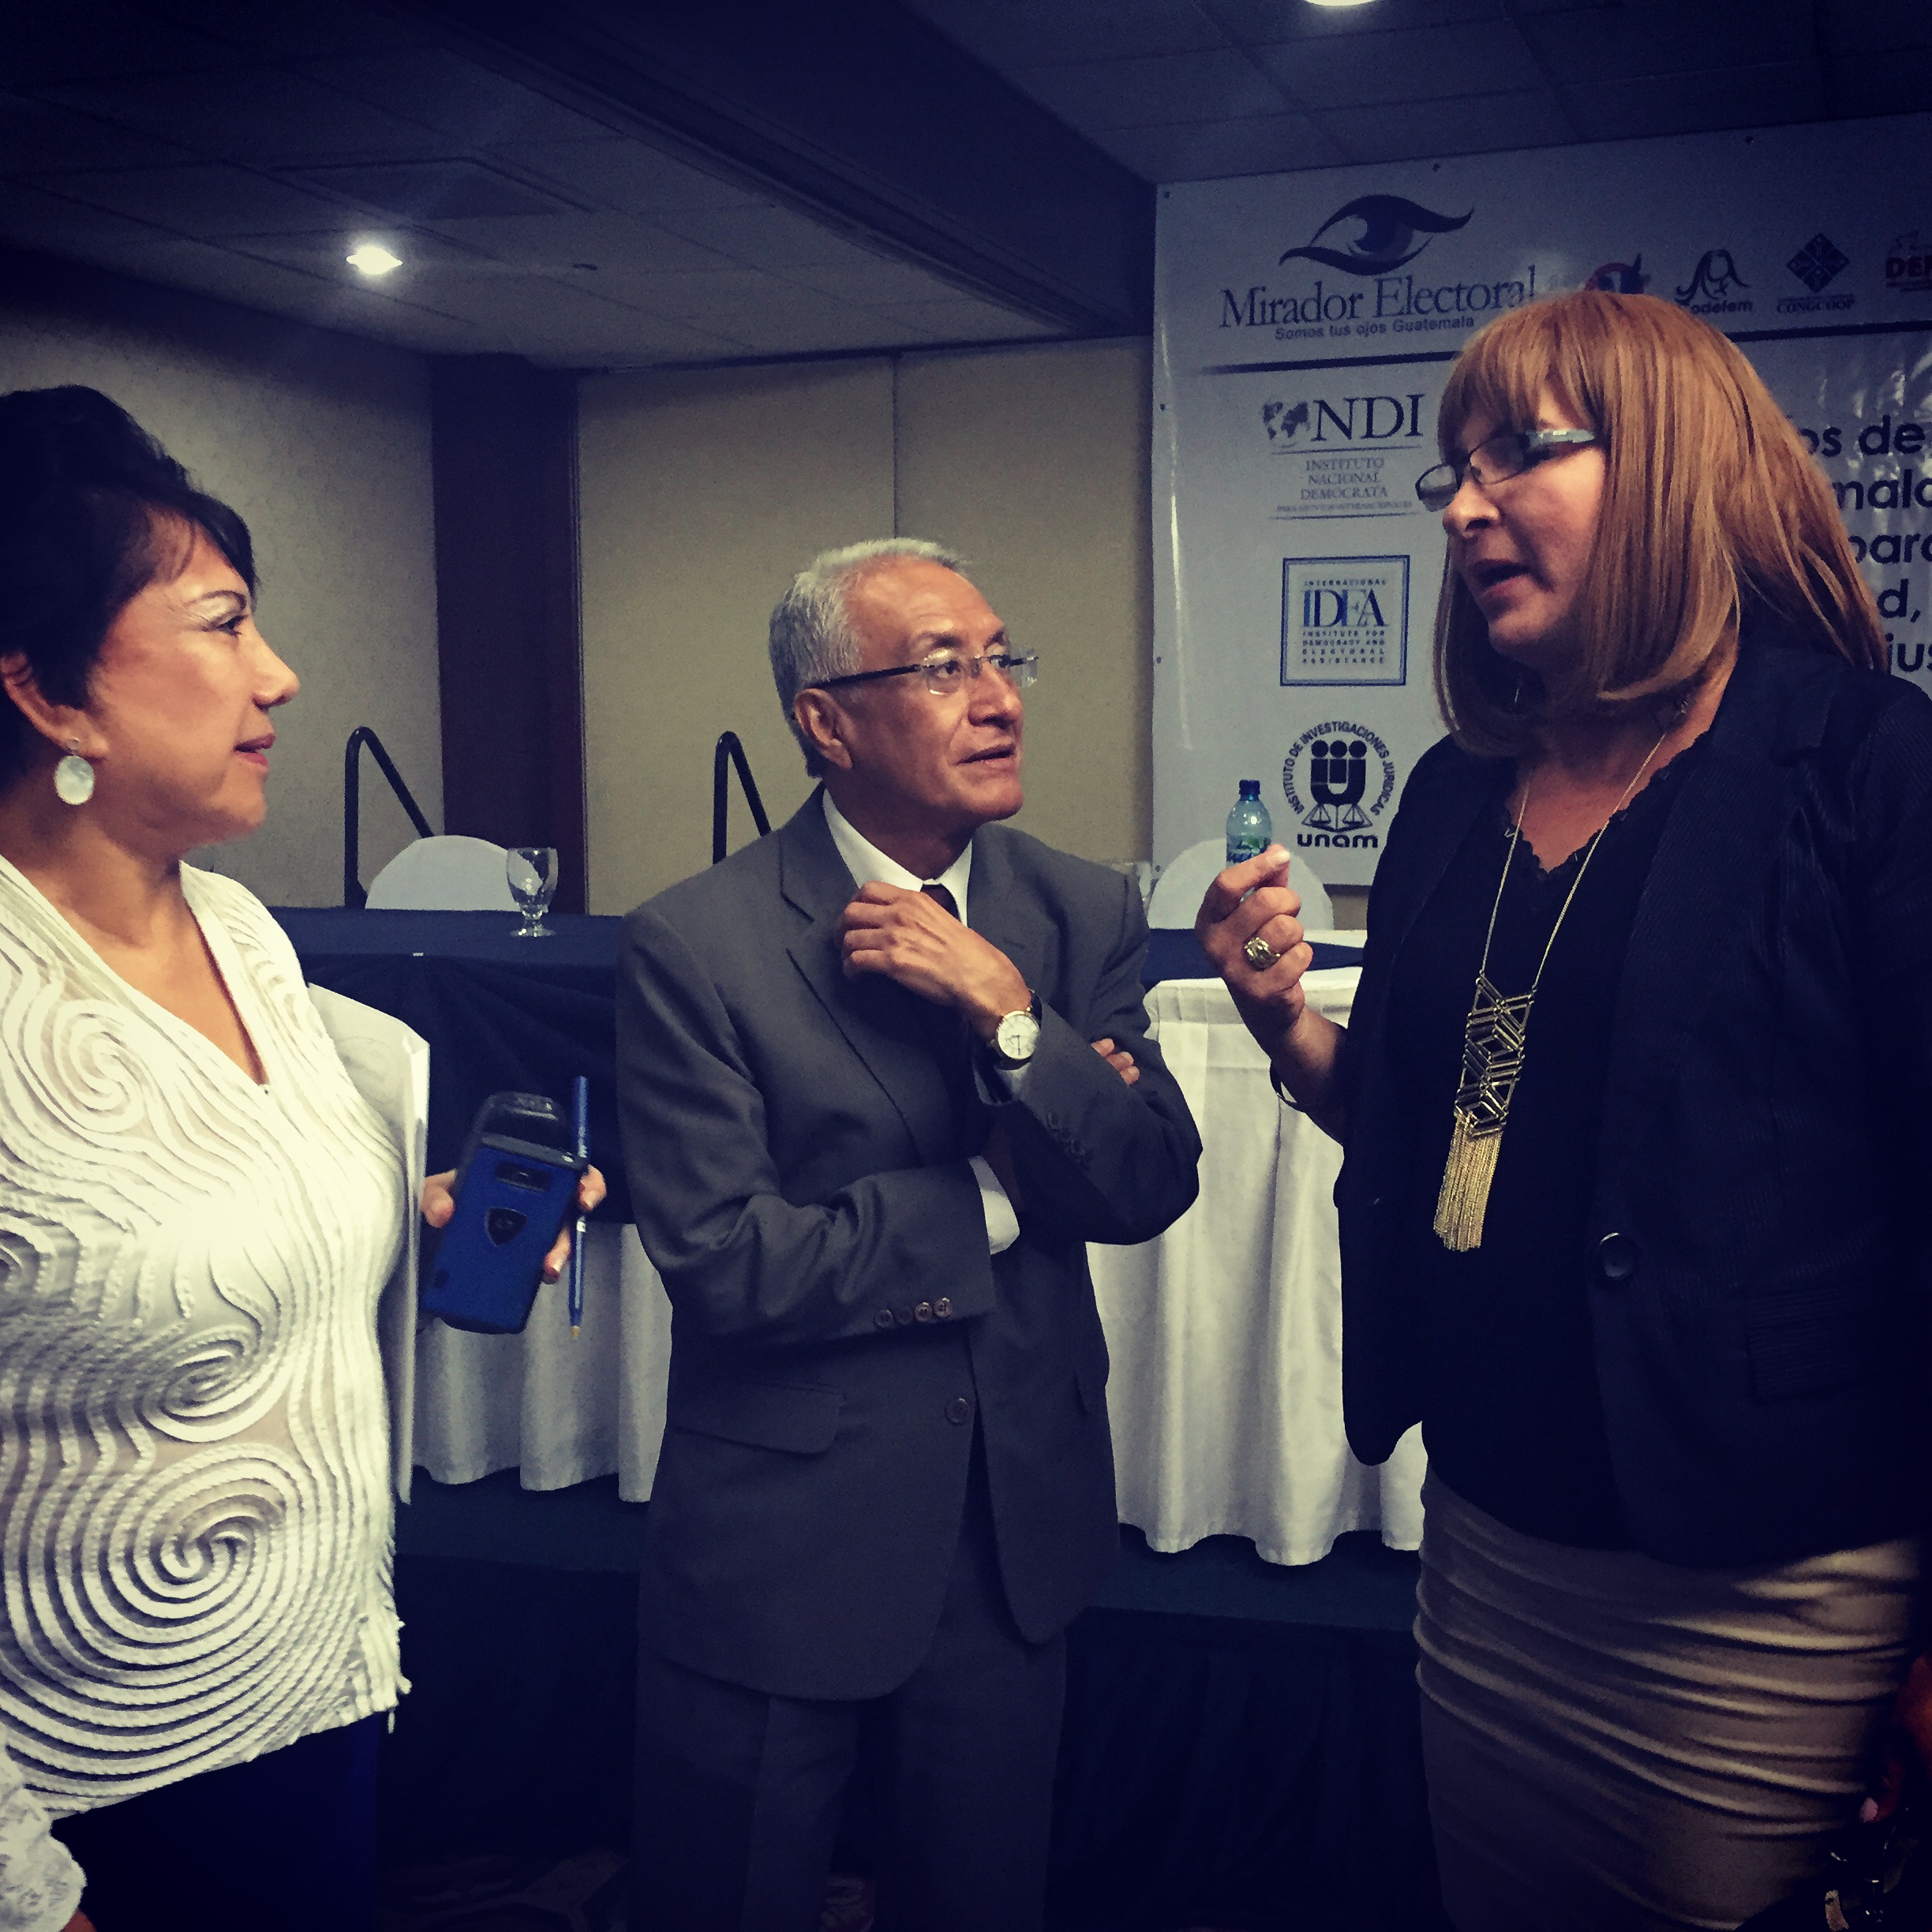 A transgender councilwoman from Peru discusses the importance of inclusion with Guatemalan electoral authorities.